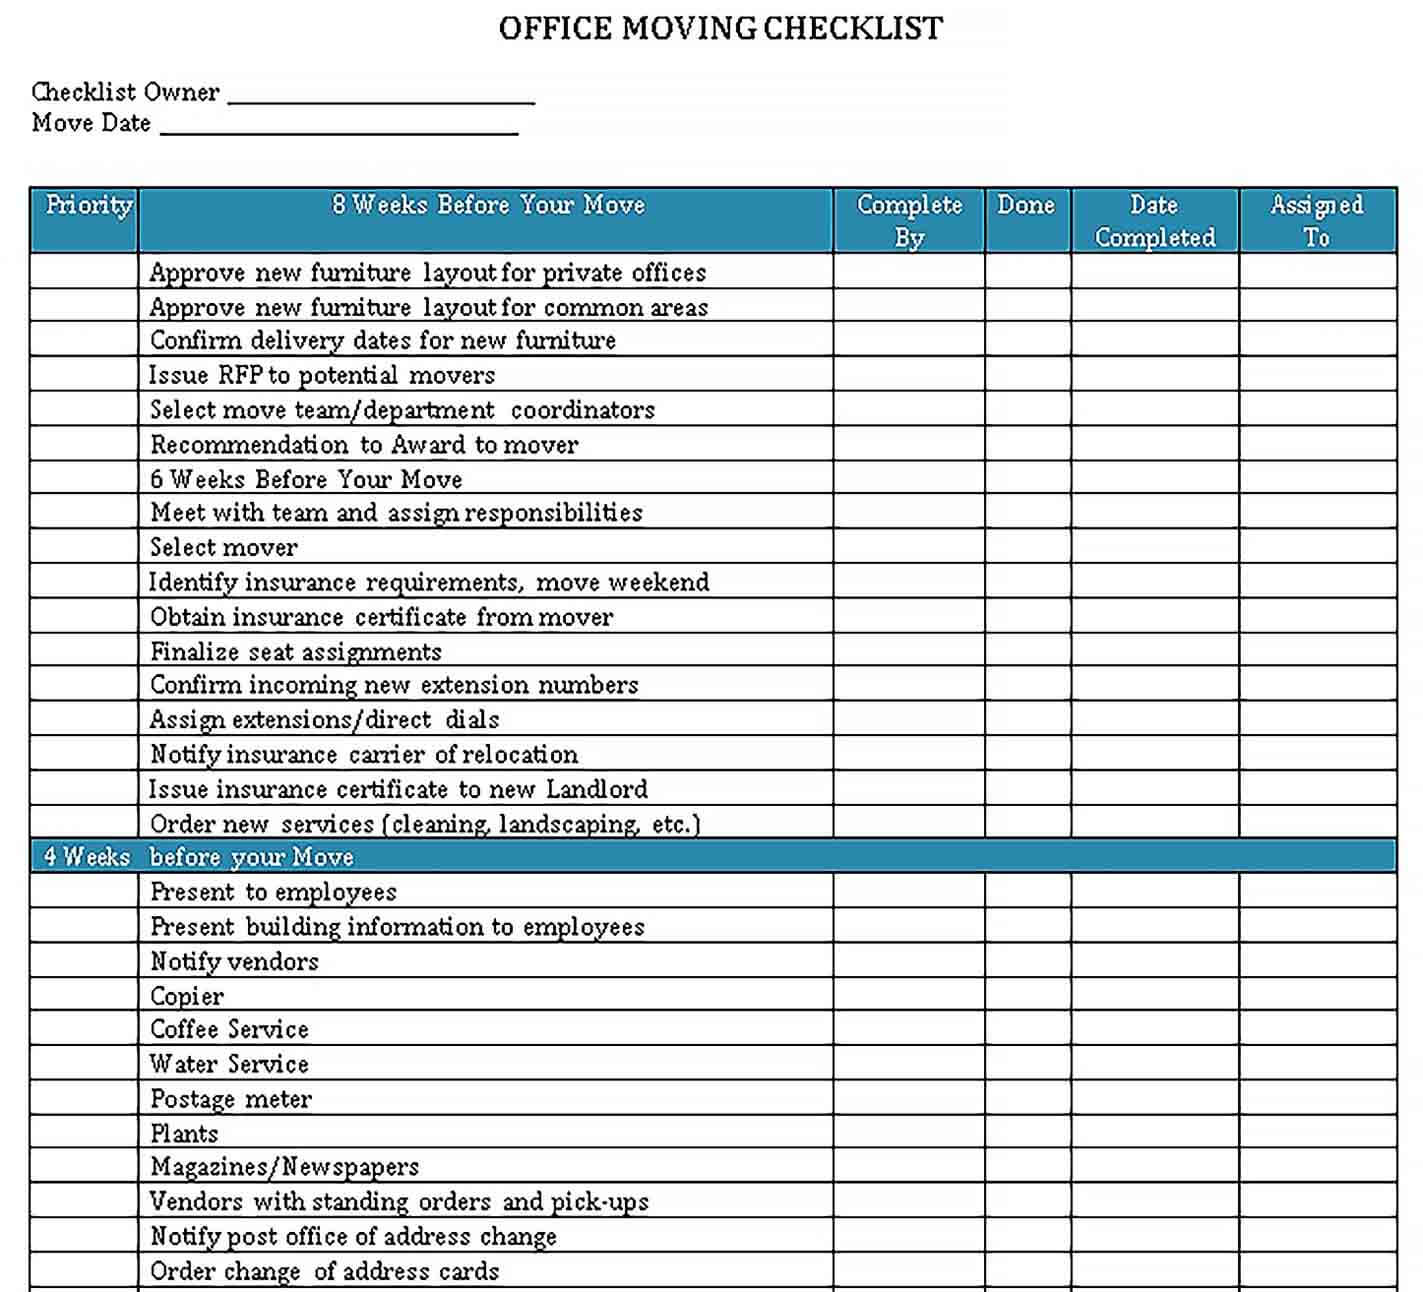 Sample Office Moving Checklist Template